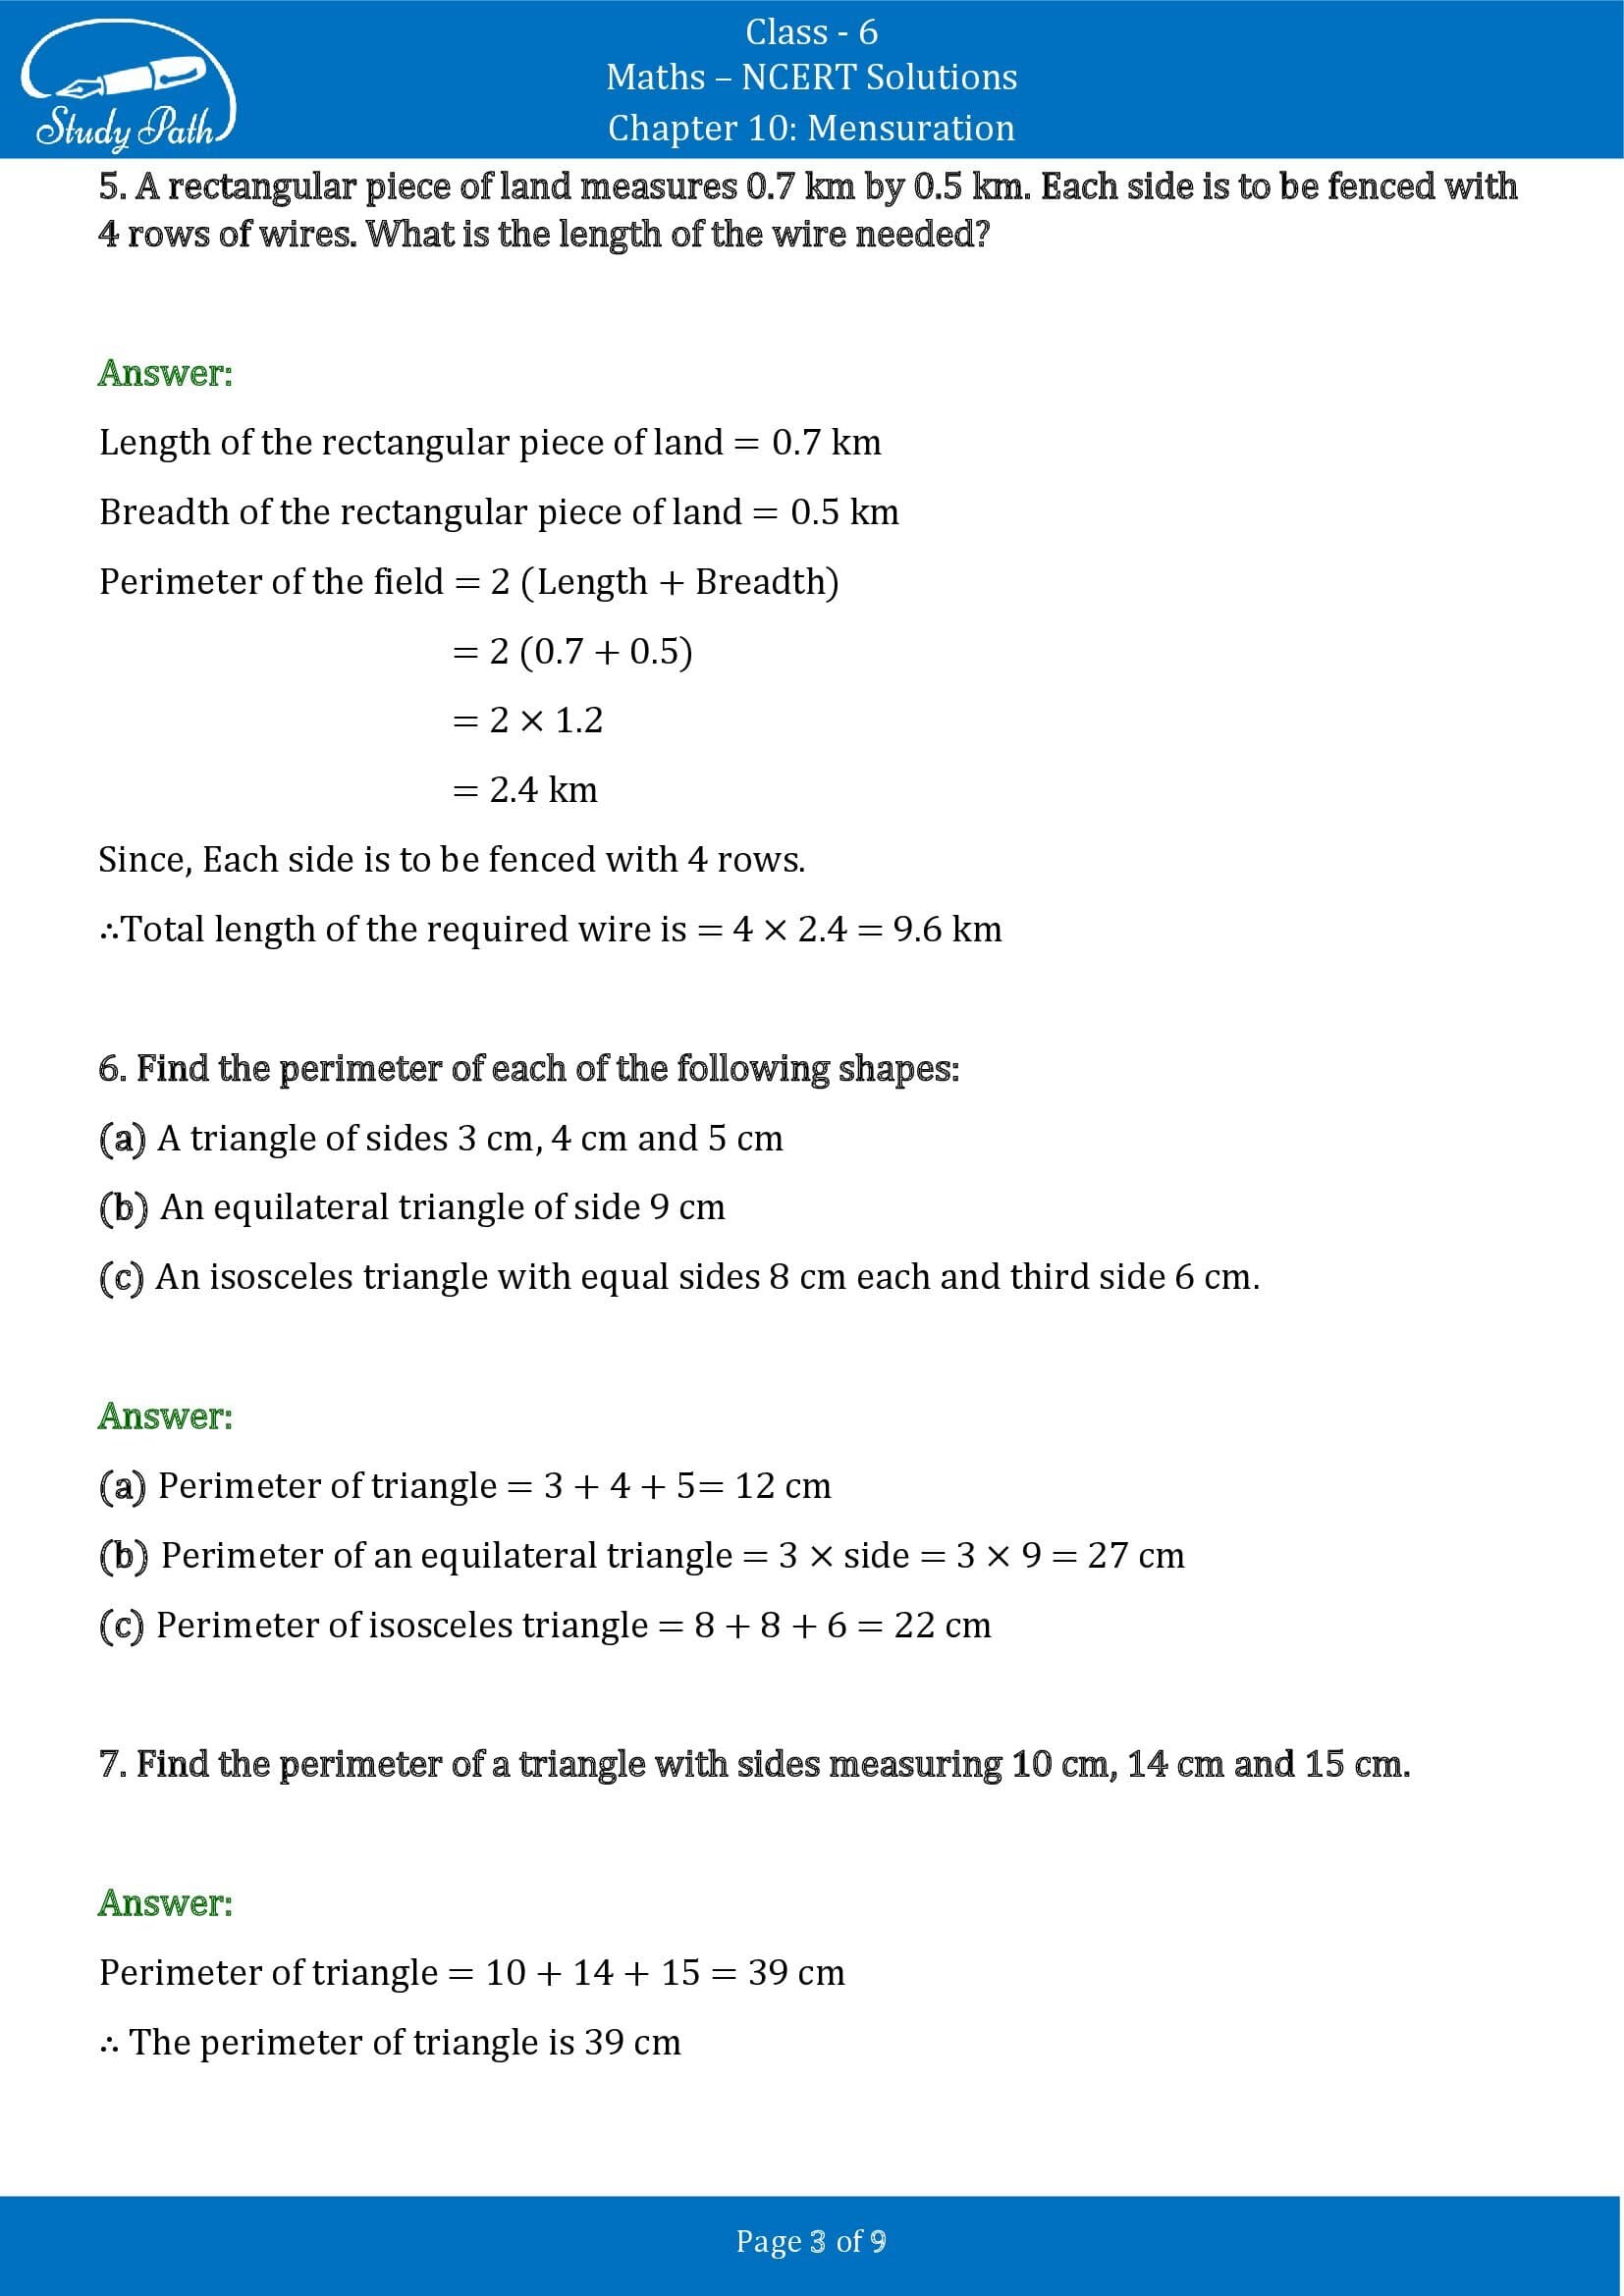 NCERT Solutions for Class 6 Maths Chapter 10 Mensuration Exercise 10.1 00003